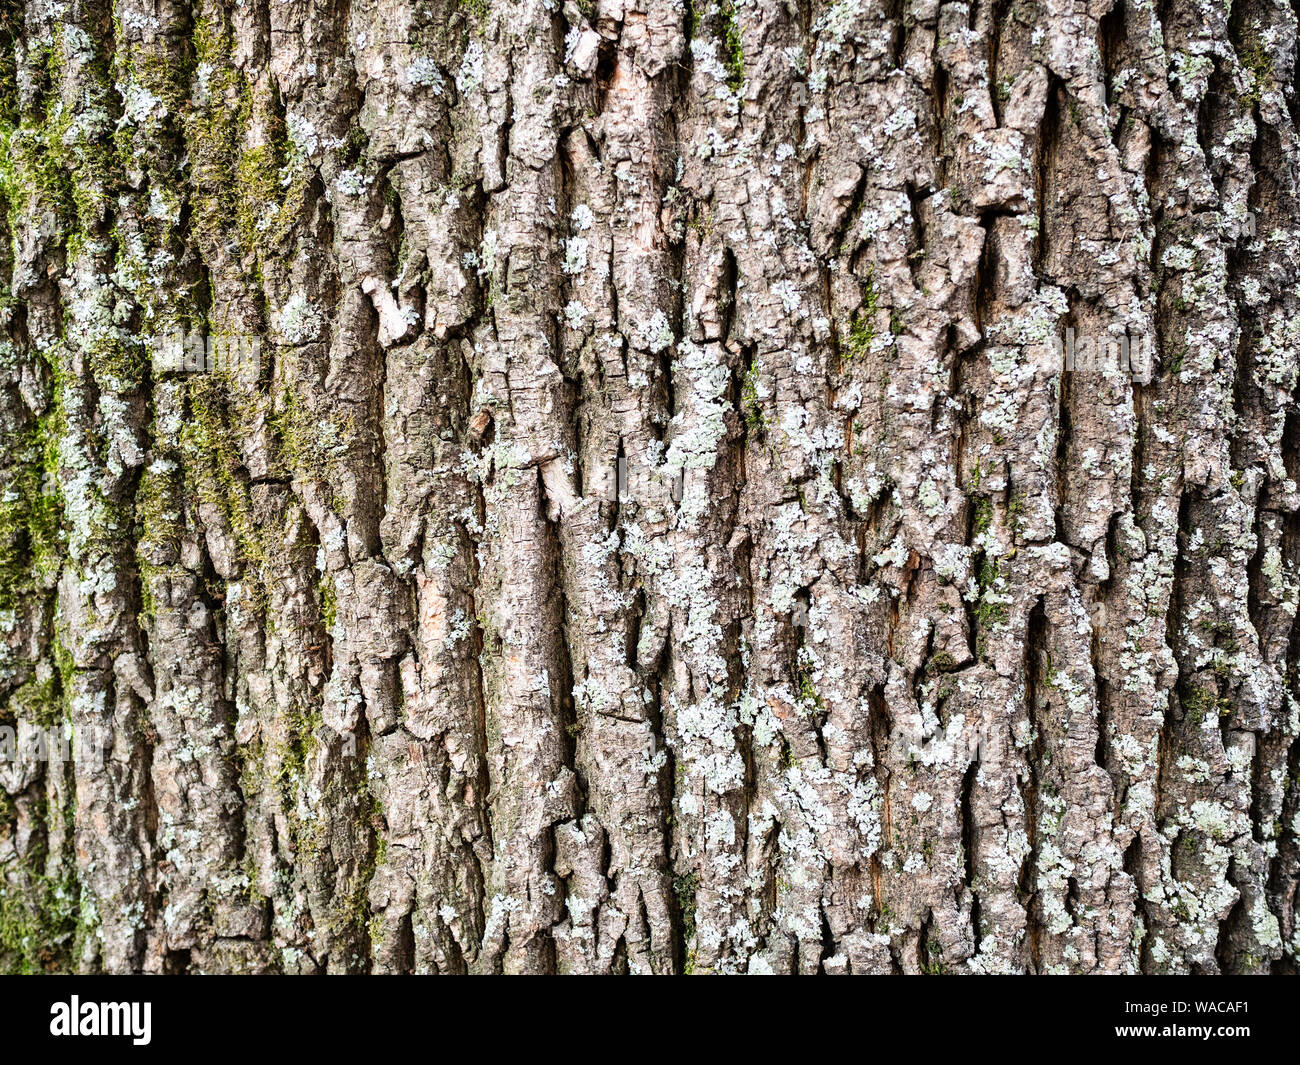 The Bark Tree Image Close Up In The Wood Stock Photo - Download Image Now -  Plant Bark, Maple Tree, Close-up - iStock